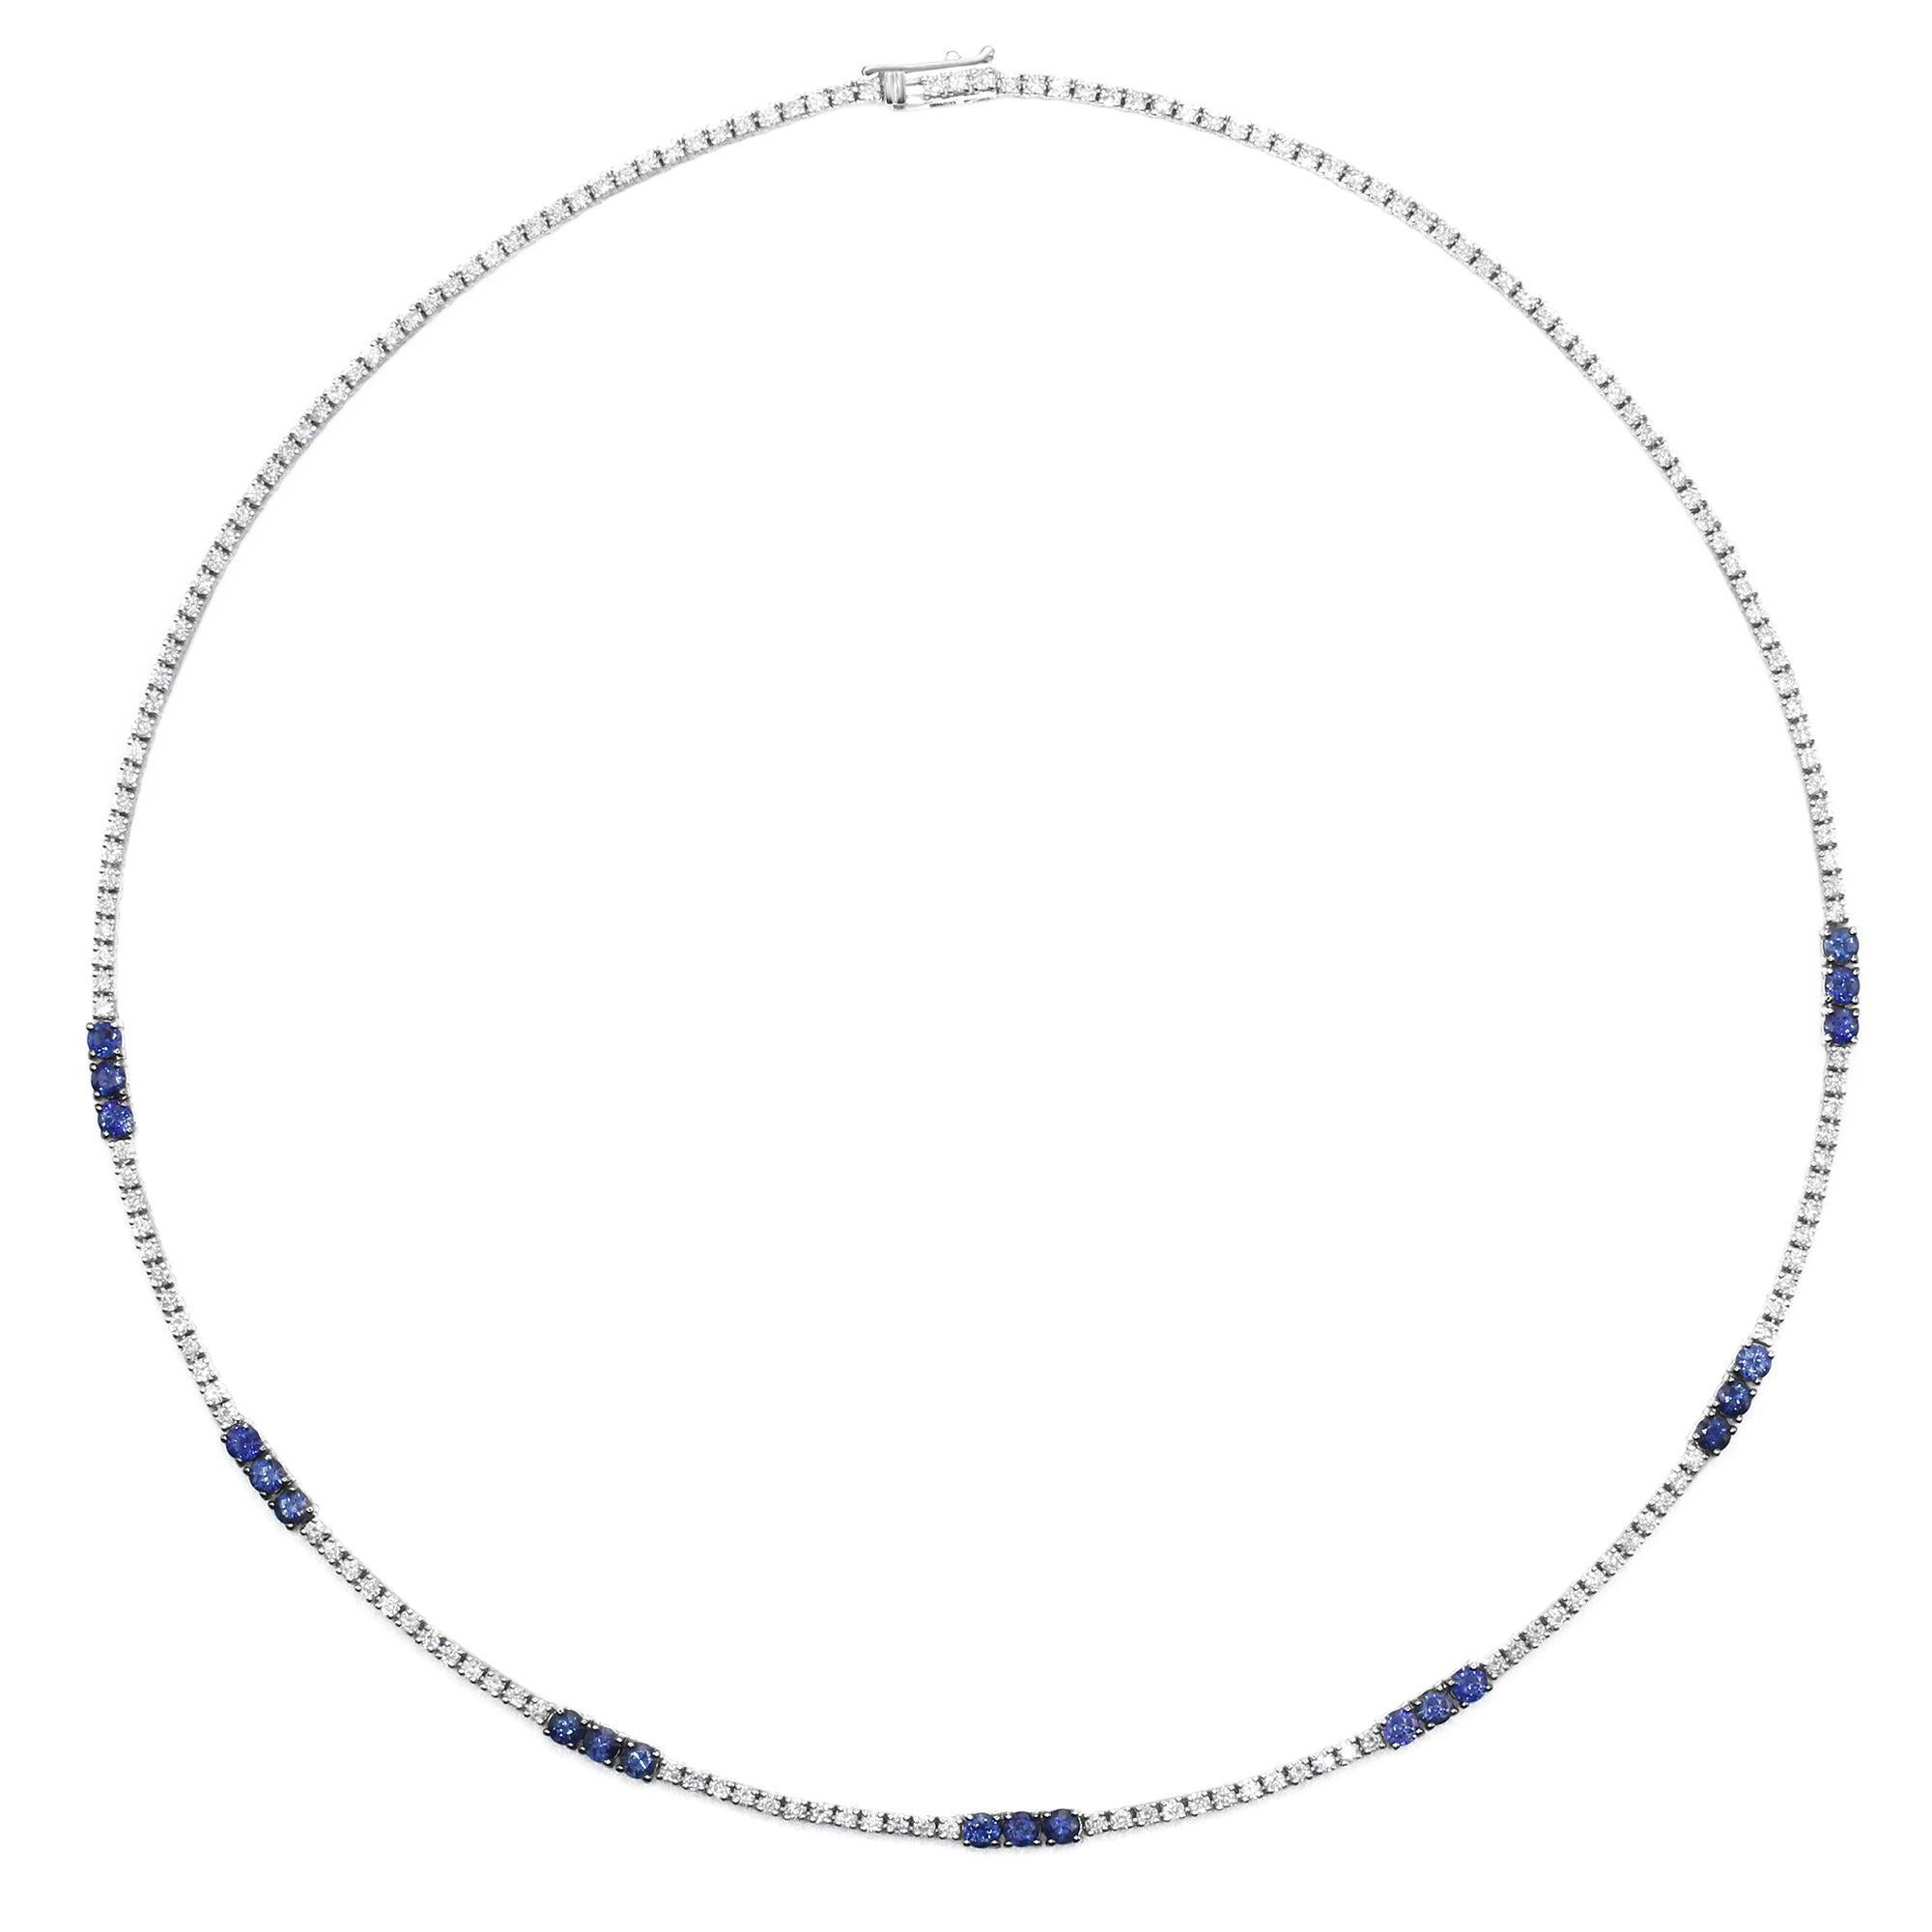 This stunning tennis necklace features round cut white diamonds and blue sapphires. All stones are prong set in 14k white gold. The necklace is secured by a locking clasp. Length: 17 inches. Width: 2.80mm. Total Sapphires weight: 2.29ct. Total